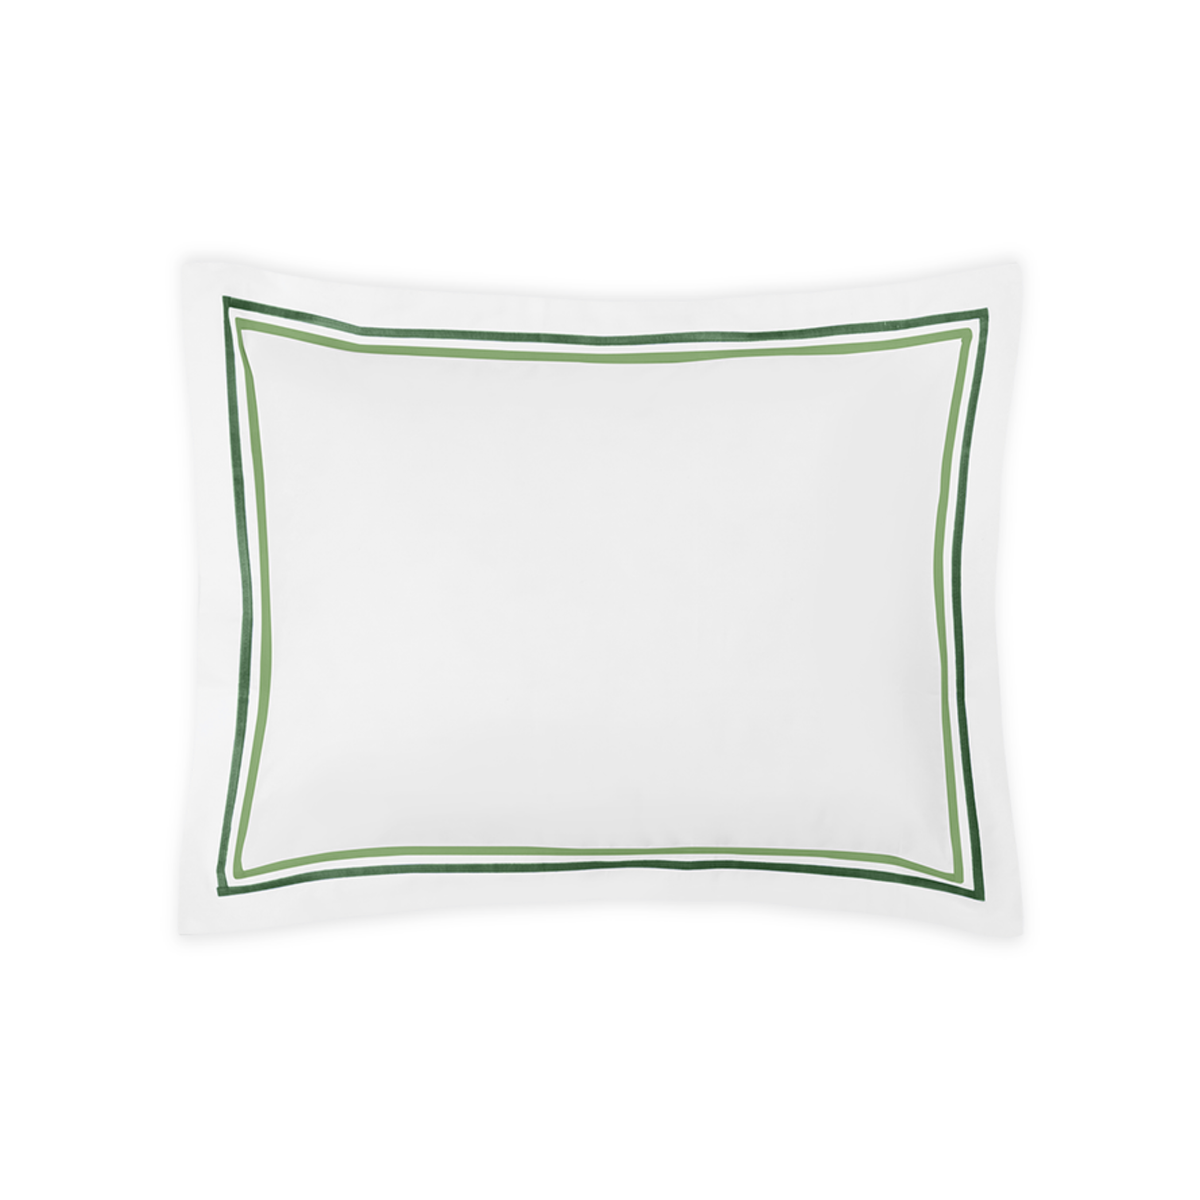 Boudoir Sham of Matouk Essex Bedding Collection in Green Color